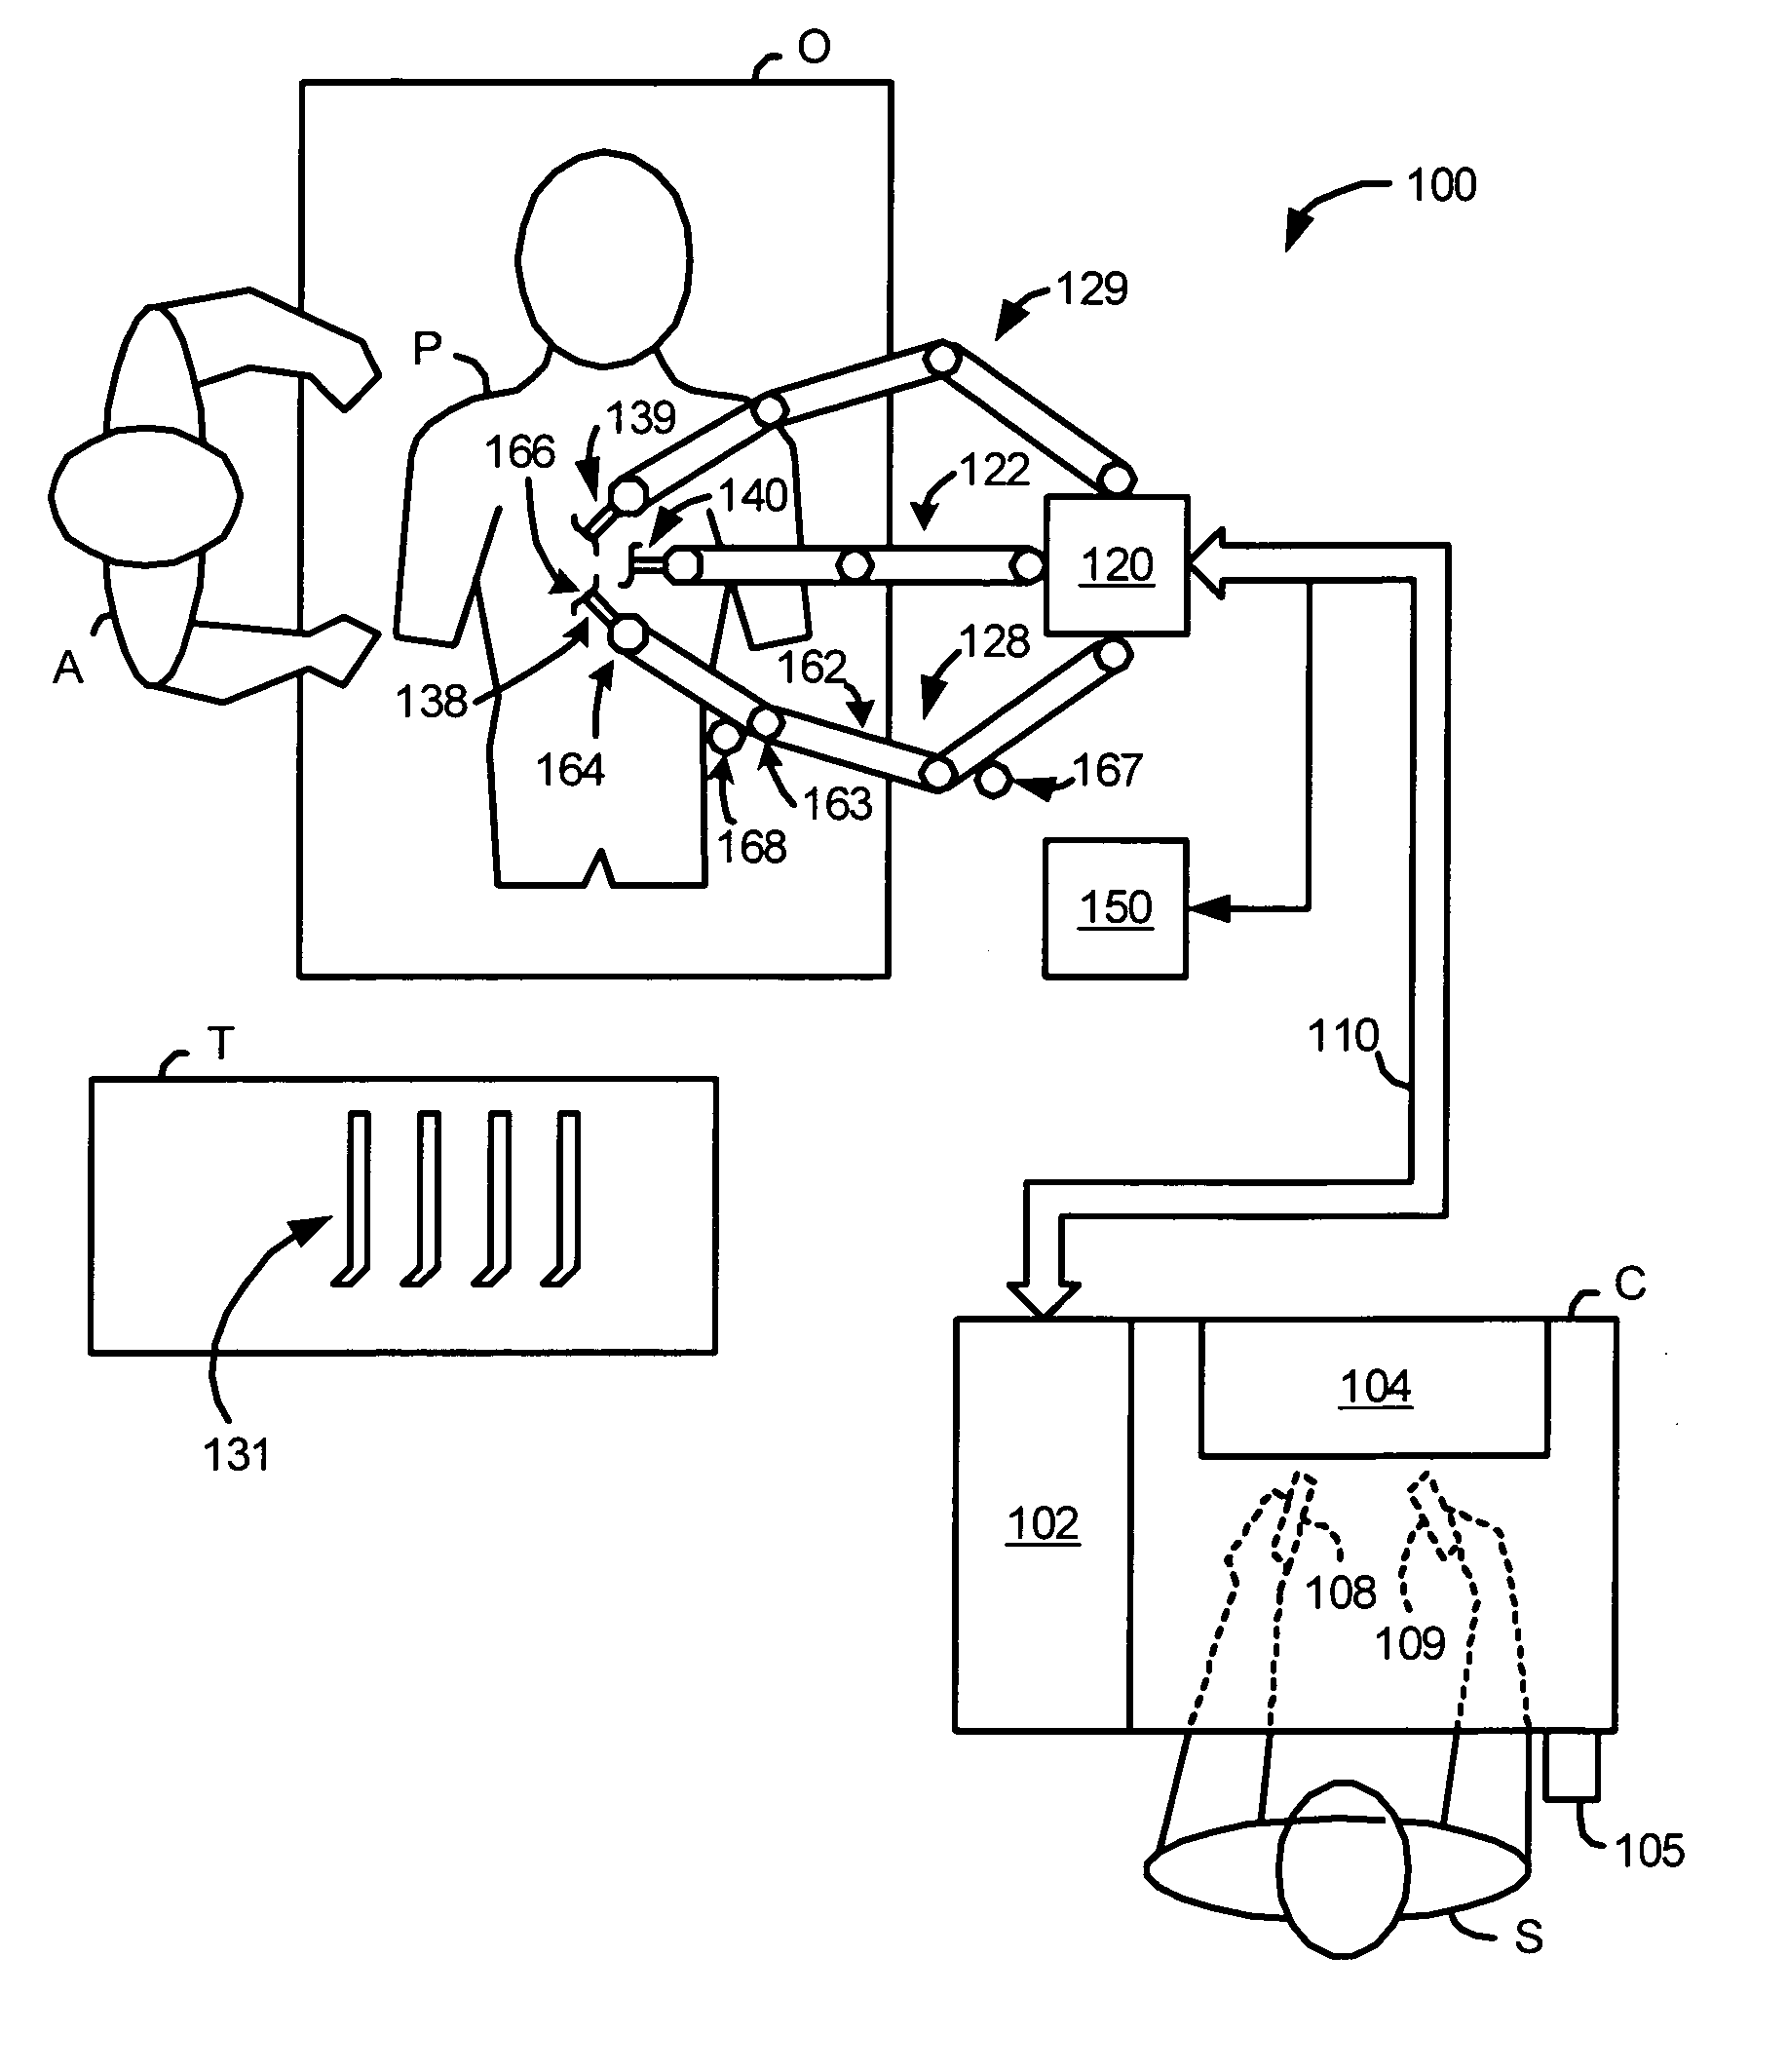 Tool position and identification indicator displayed in a boundary area of a computer display screen